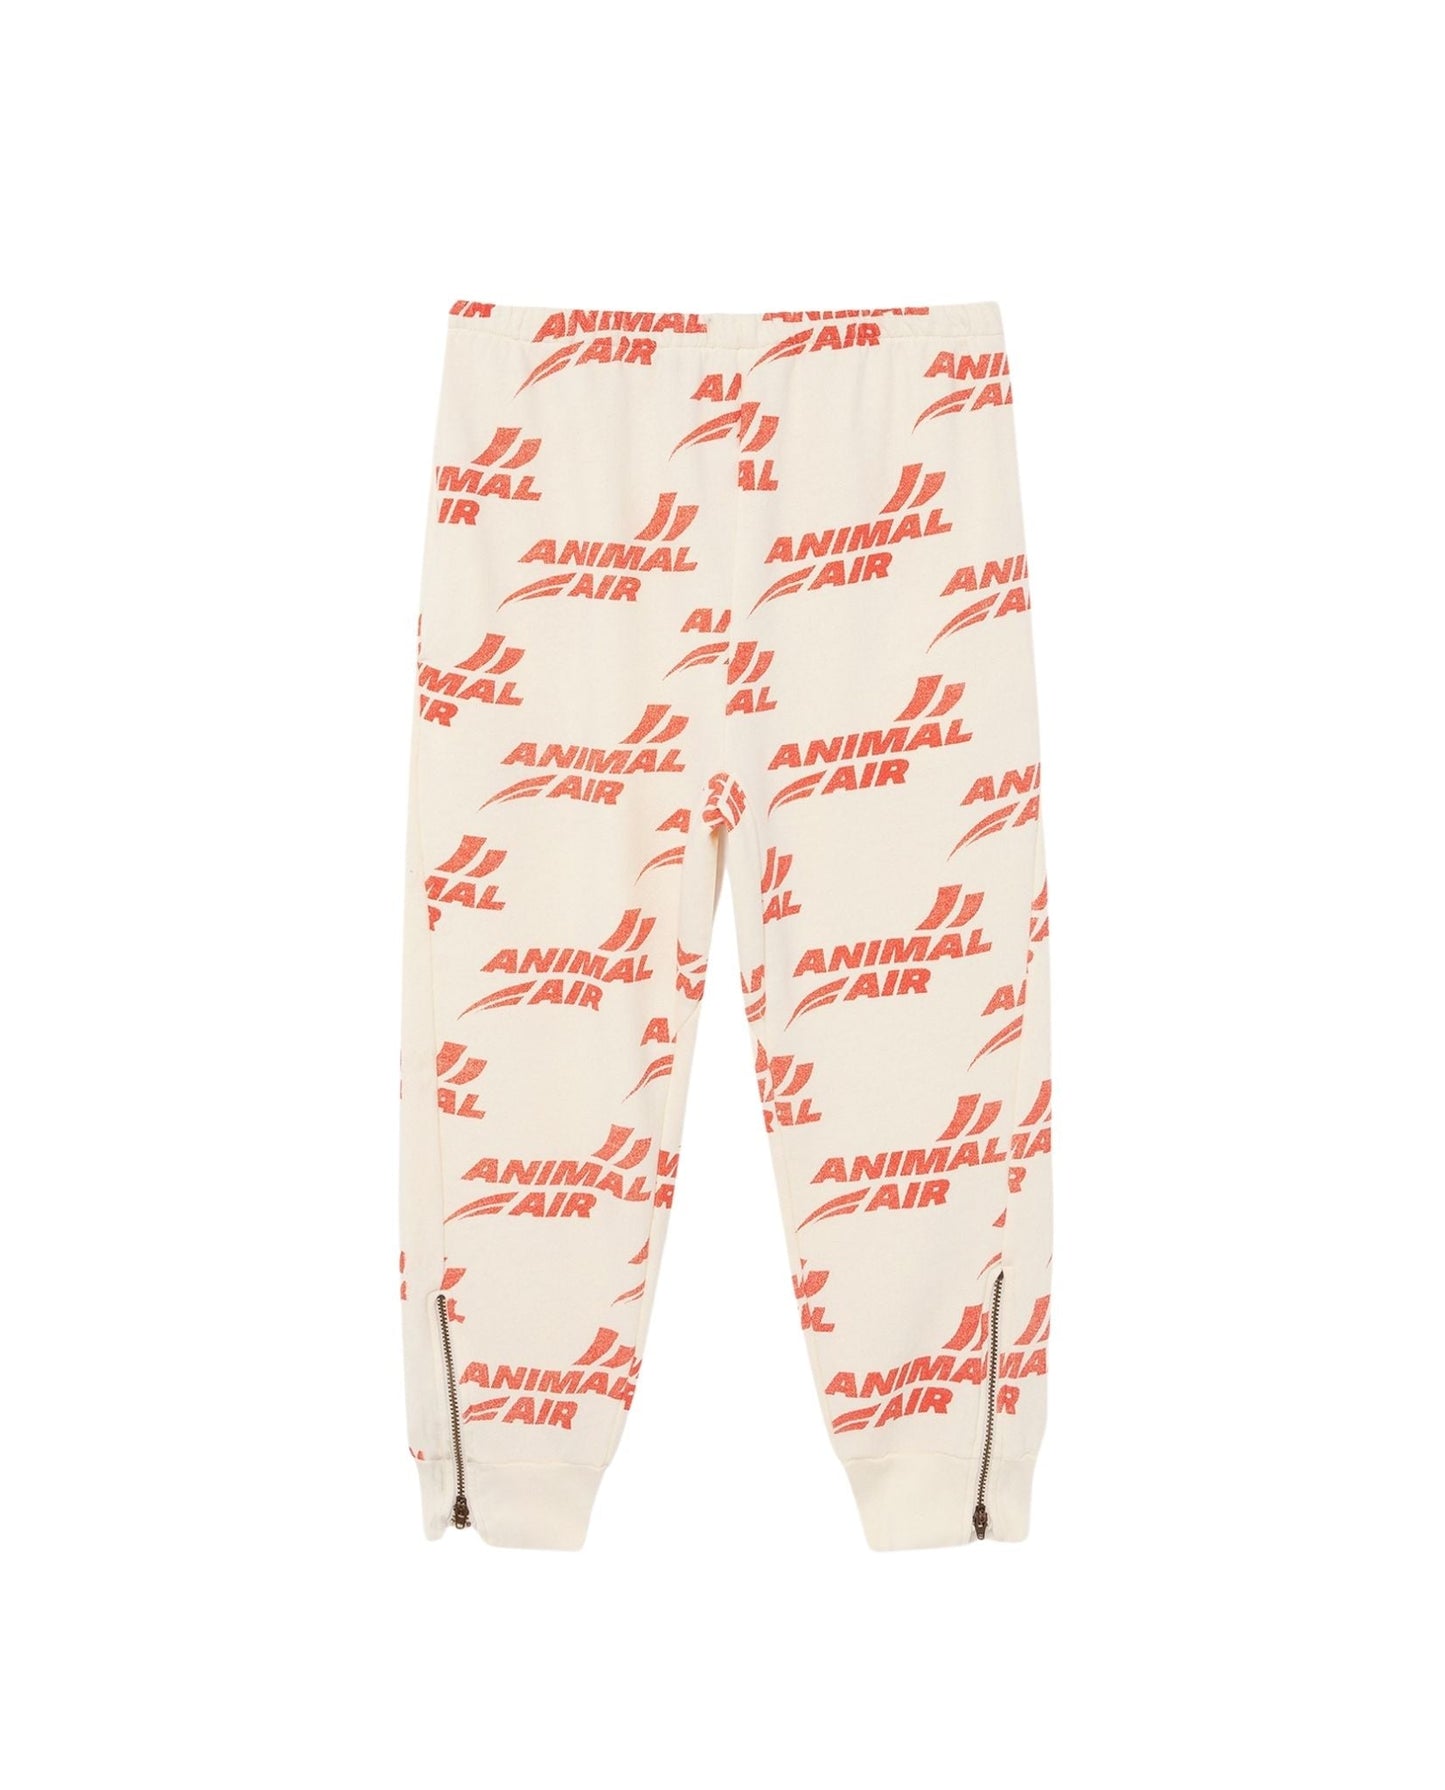 Panther pants White animal air Trousers The Animals Observatory 